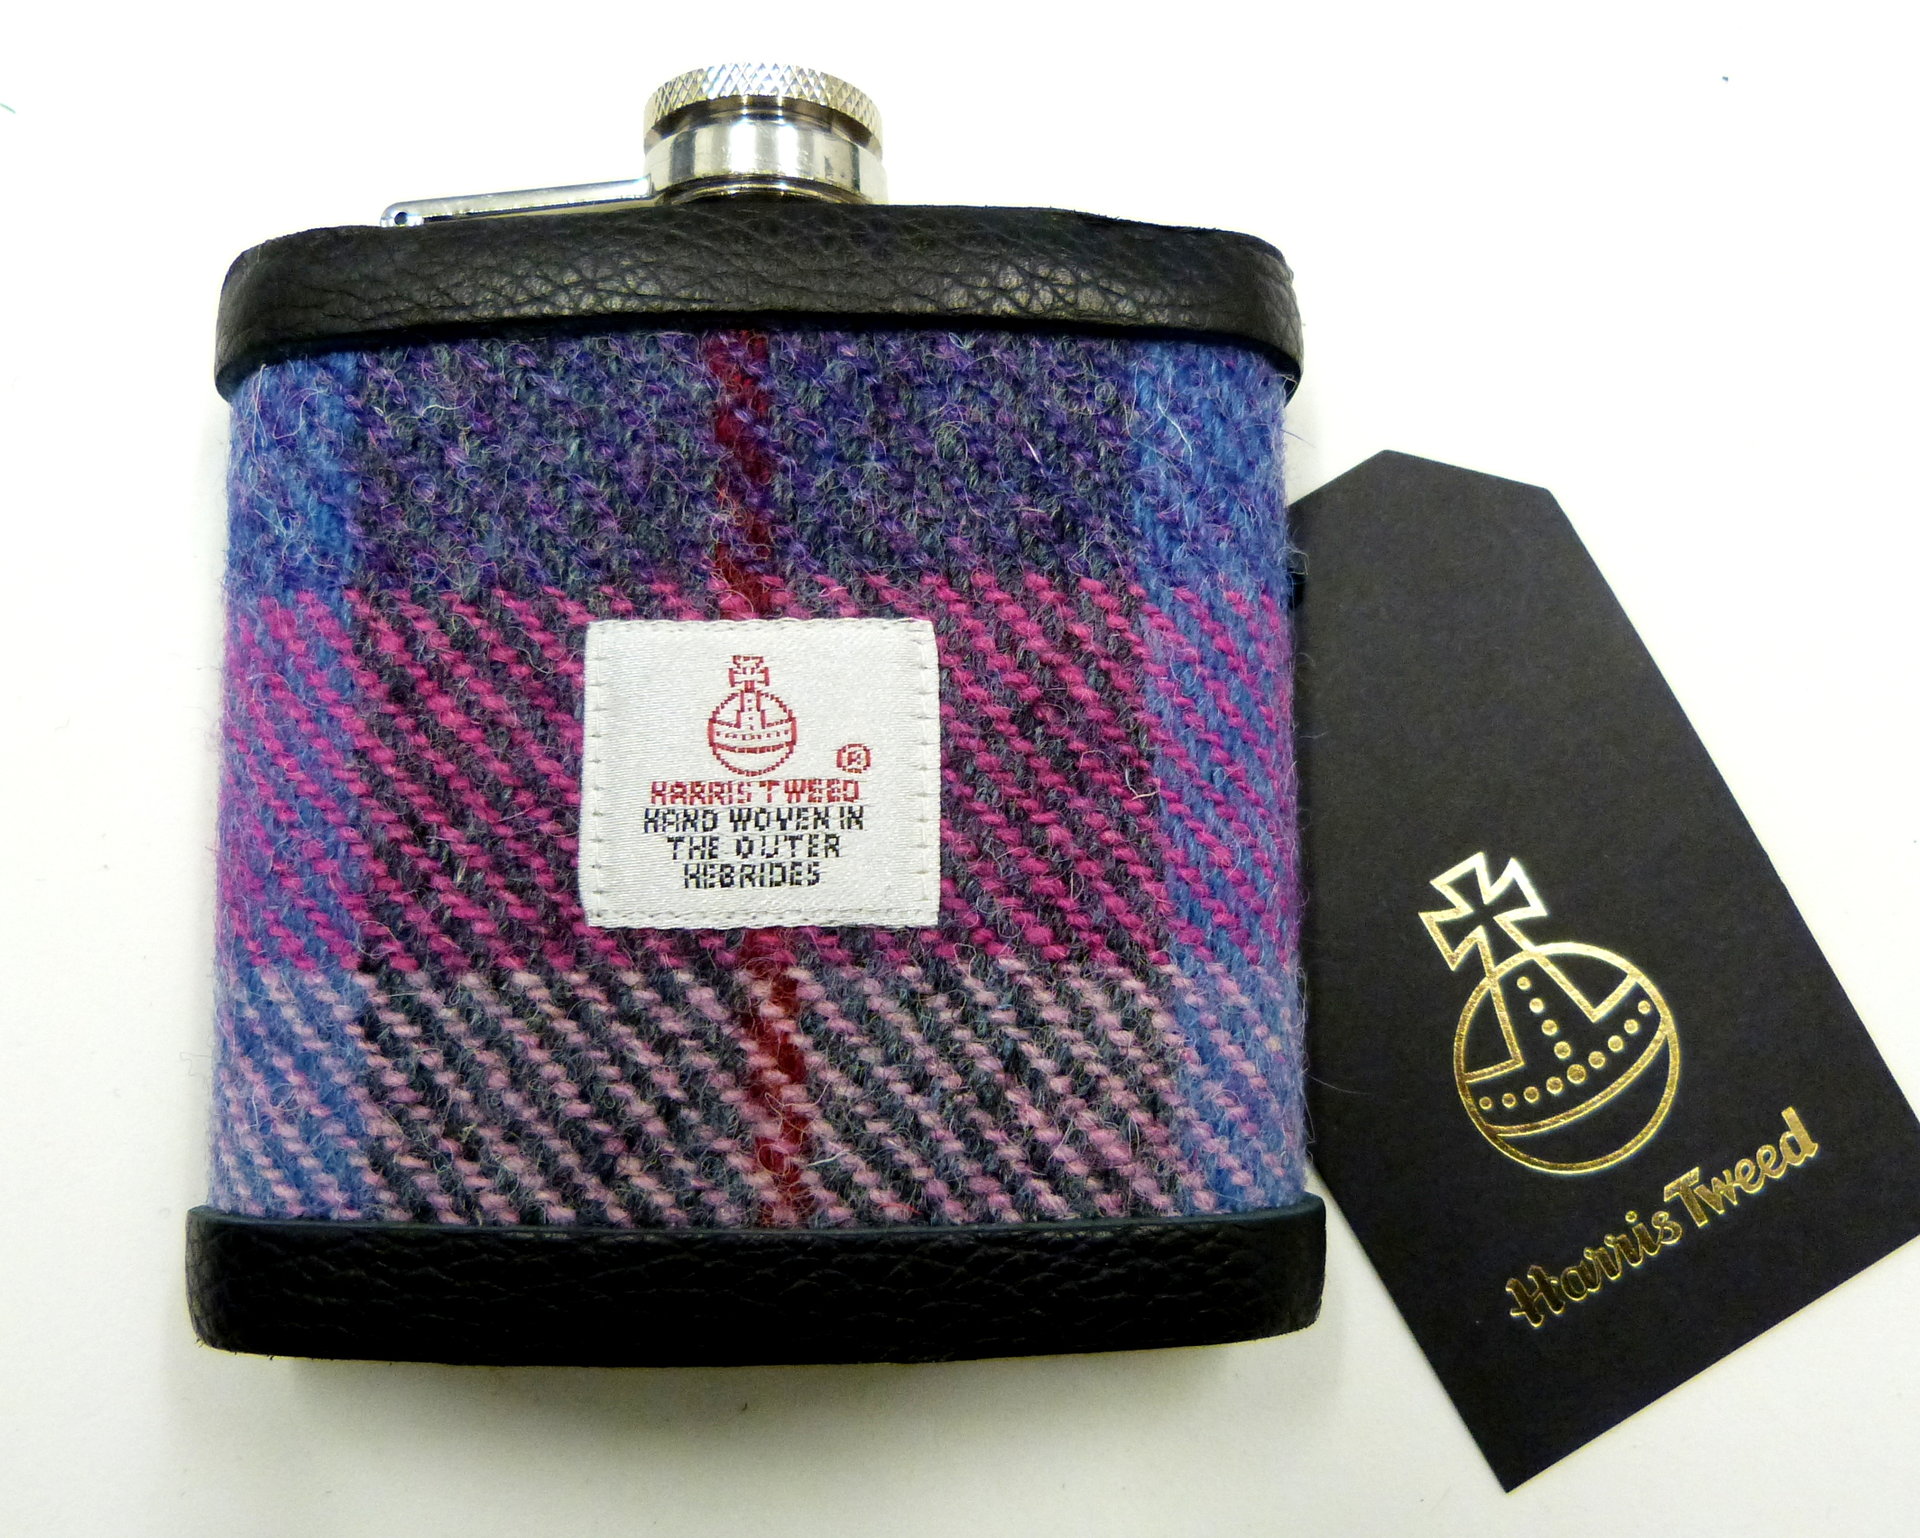 Harris Tweed hip flask in rich purple, red, pink and blue plaid weave